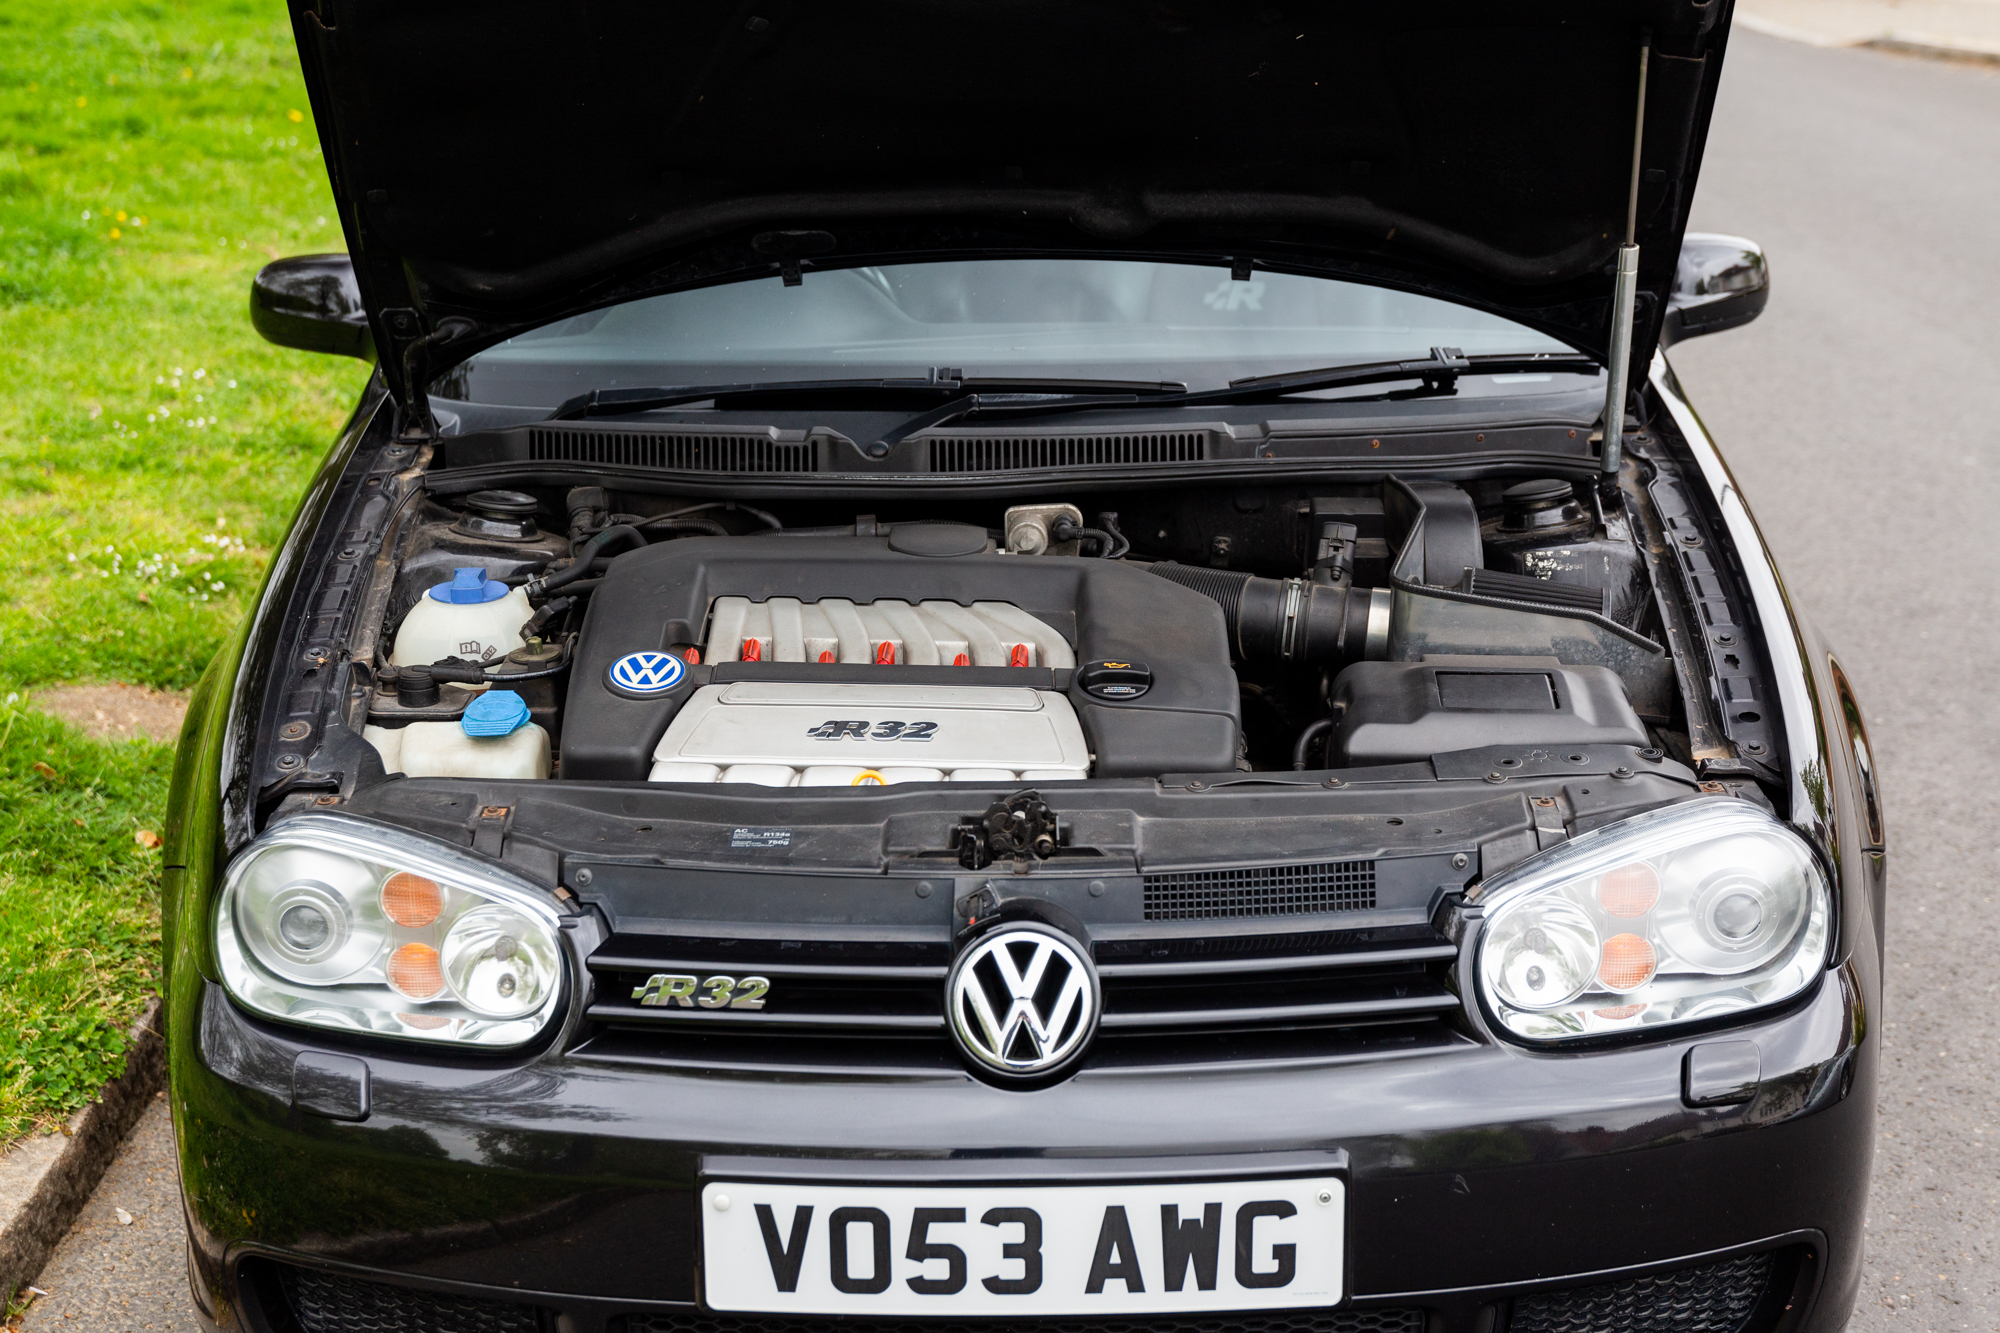 2003 VOLKSWAGEN GOLF (MK4) R32 for sale by auction in London, United Kingdom pic